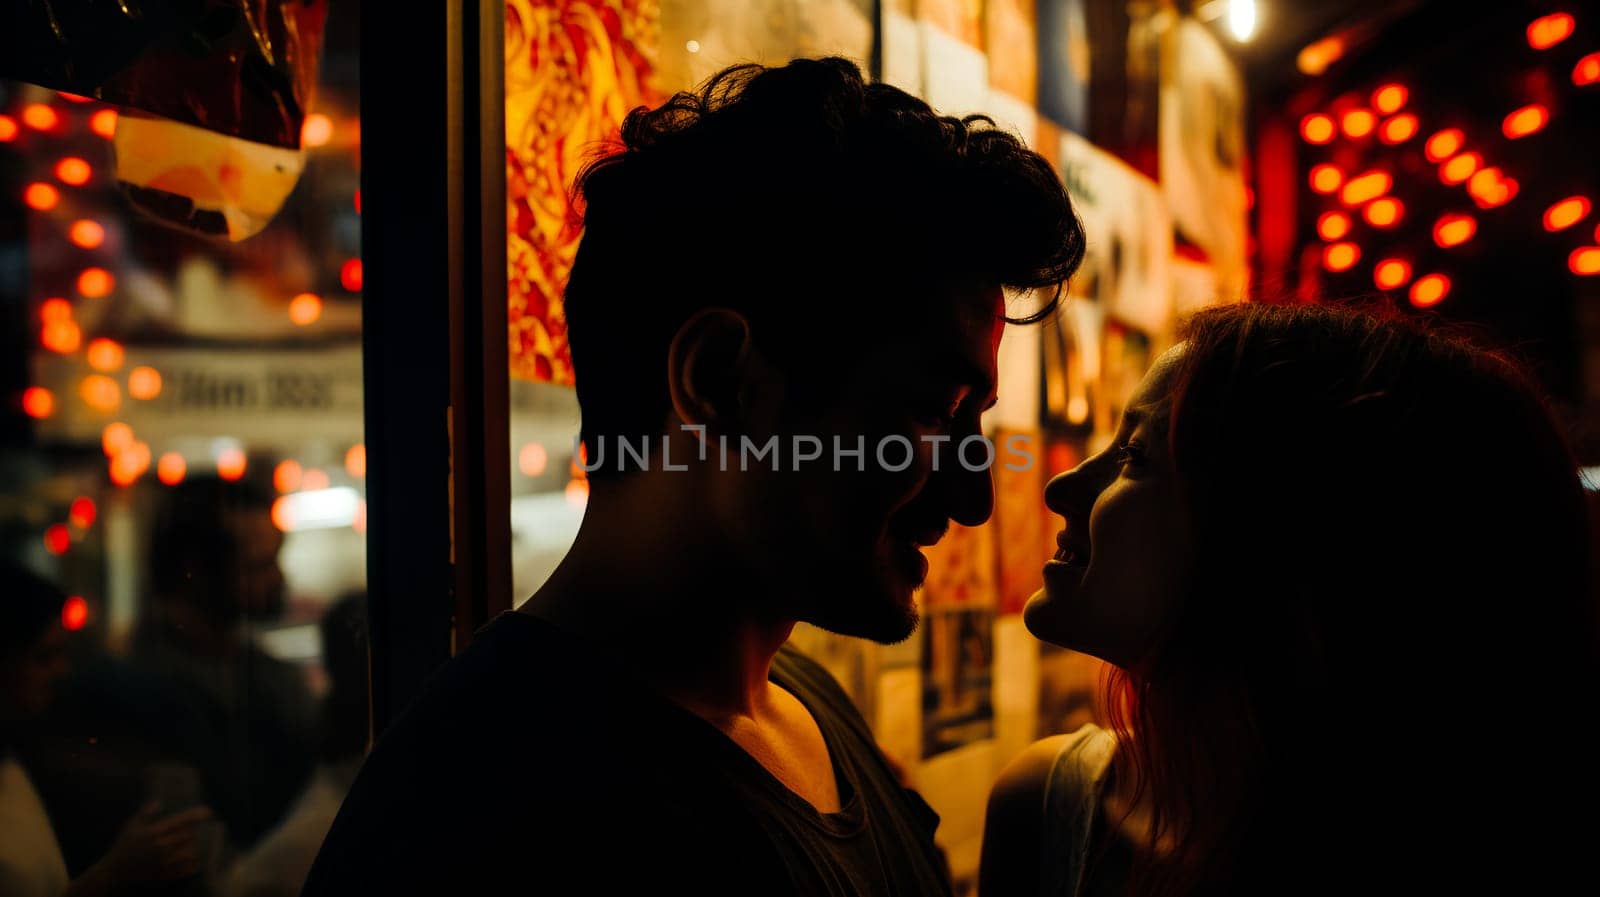 Intimate Couple Embracing in Evening Light by chrisroll